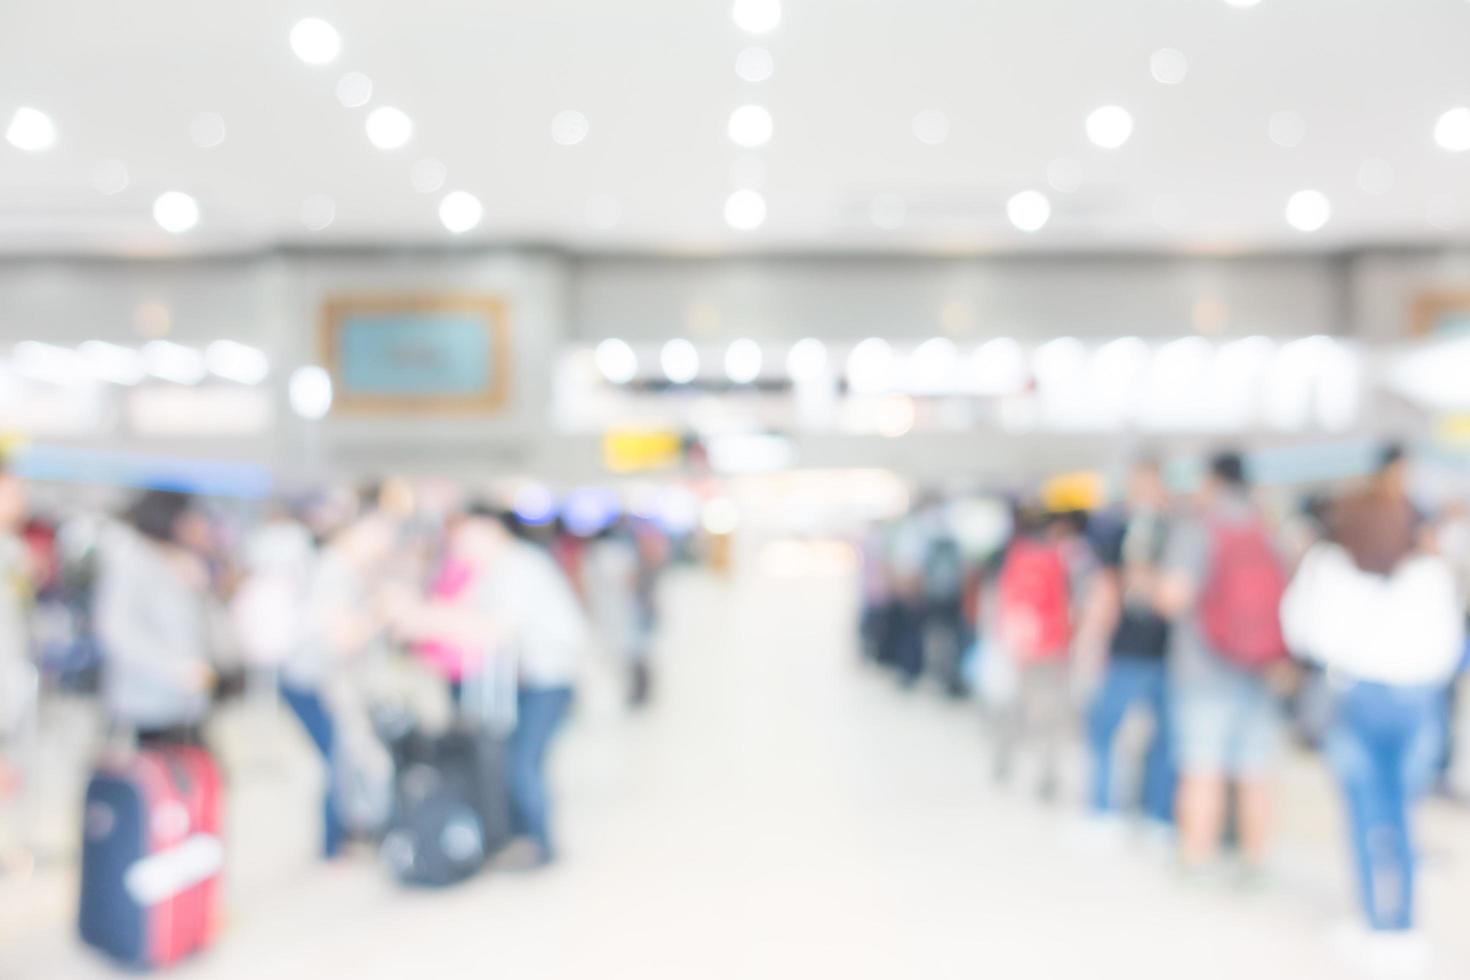 Abstract defocused airport interior for background photo